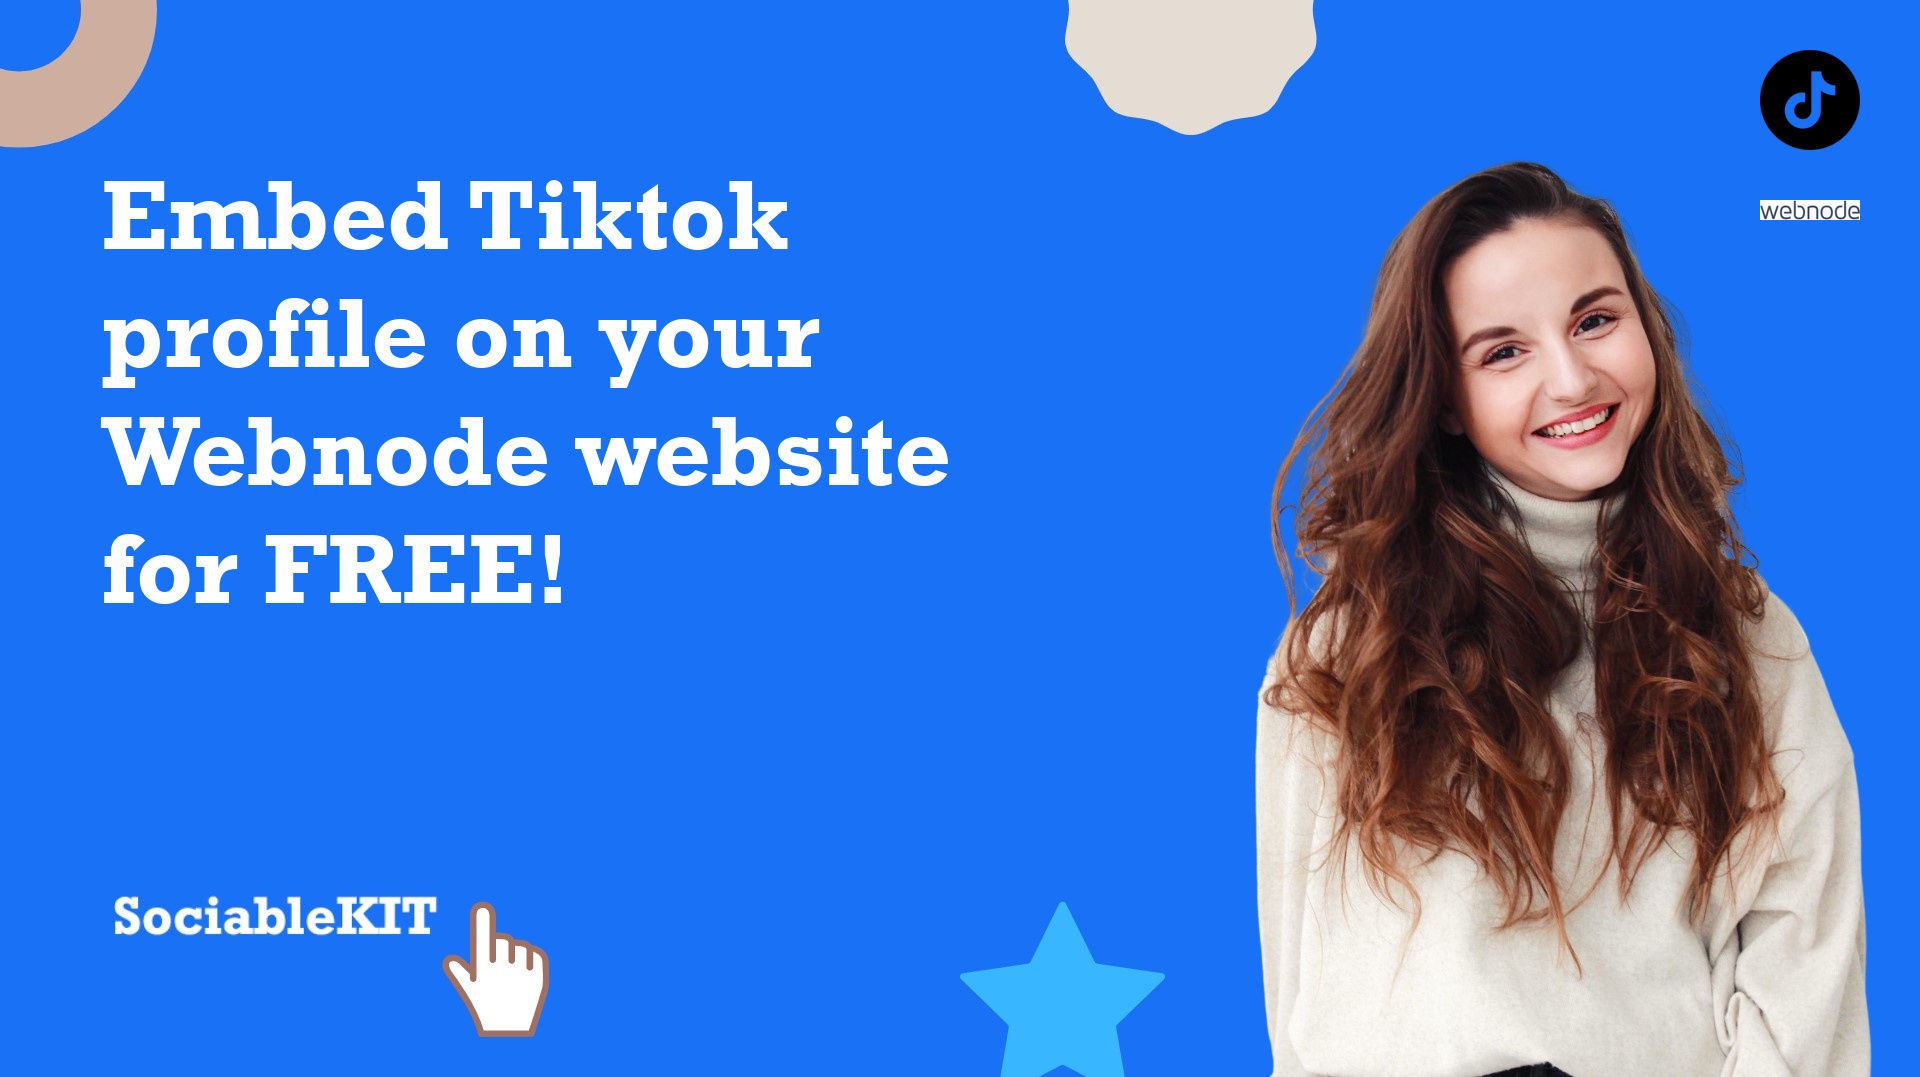 How to embed Tiktok profile on your HTML website for FREE?